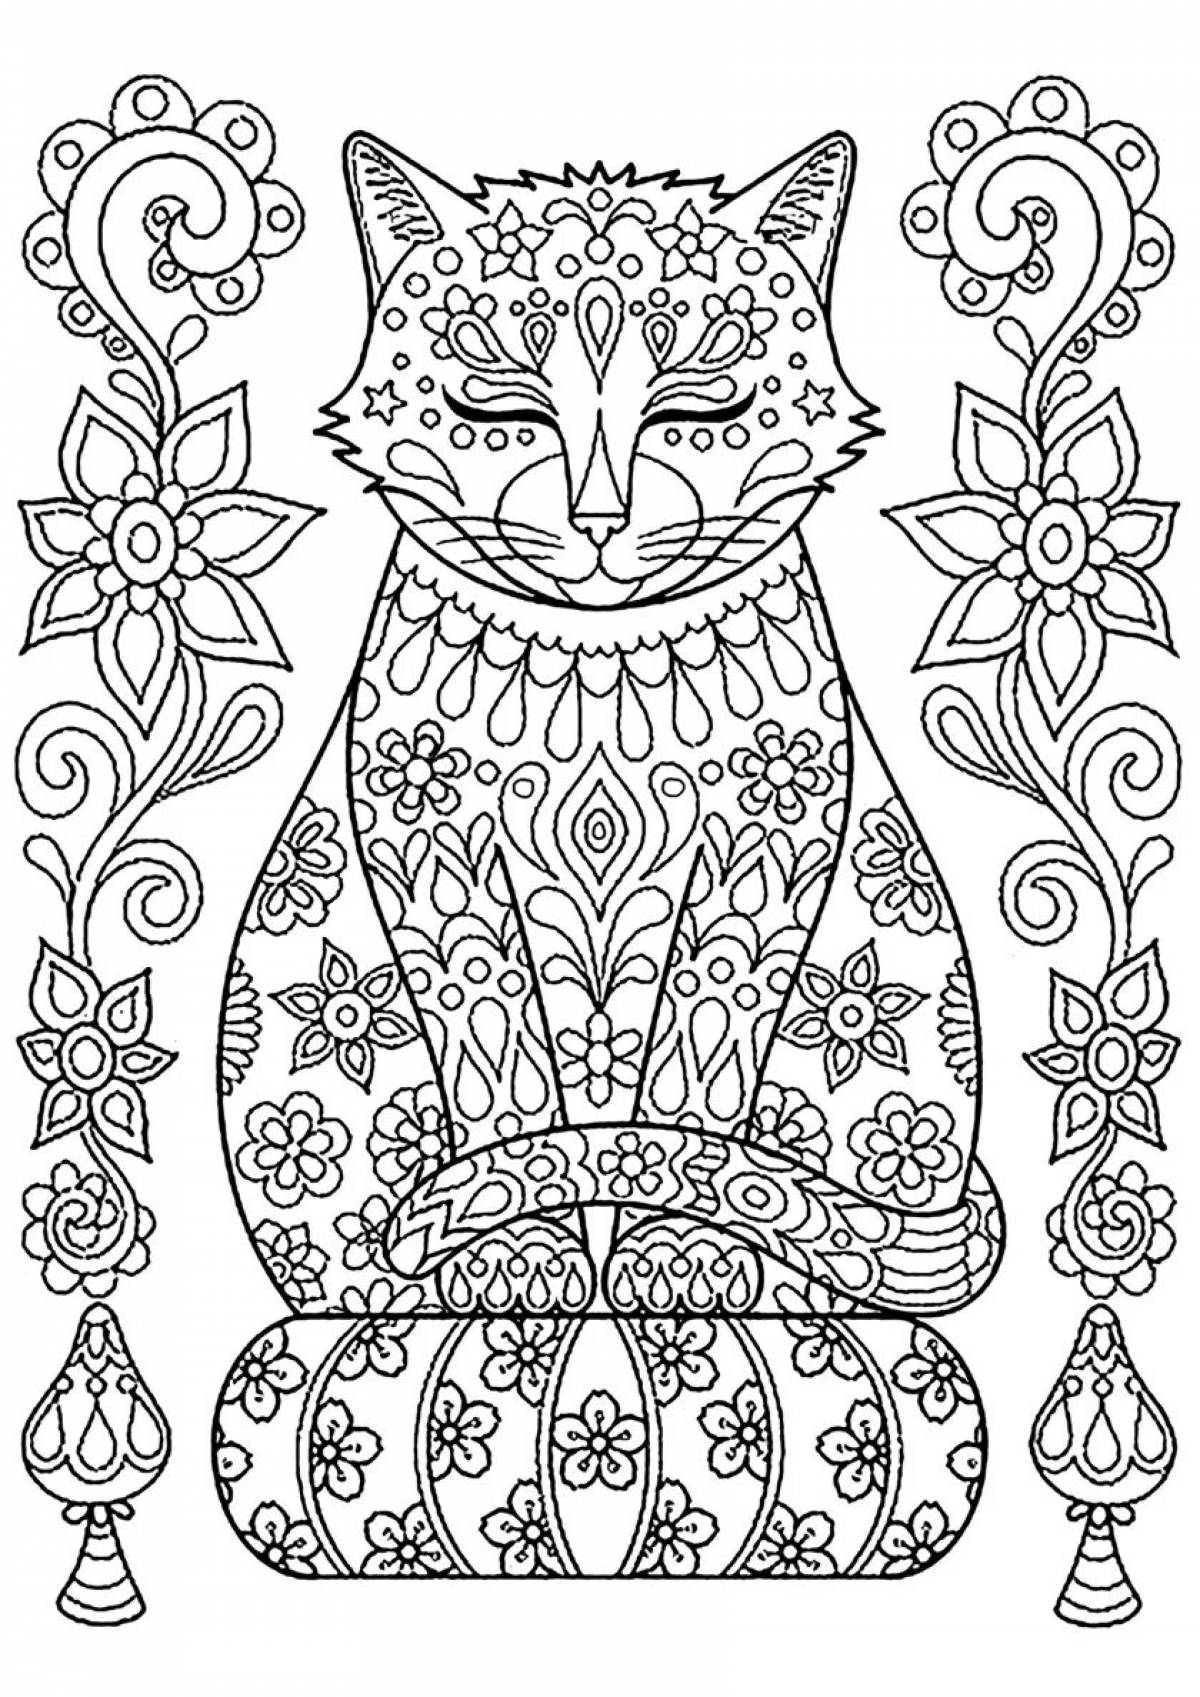 Coloring page witty patterned cat